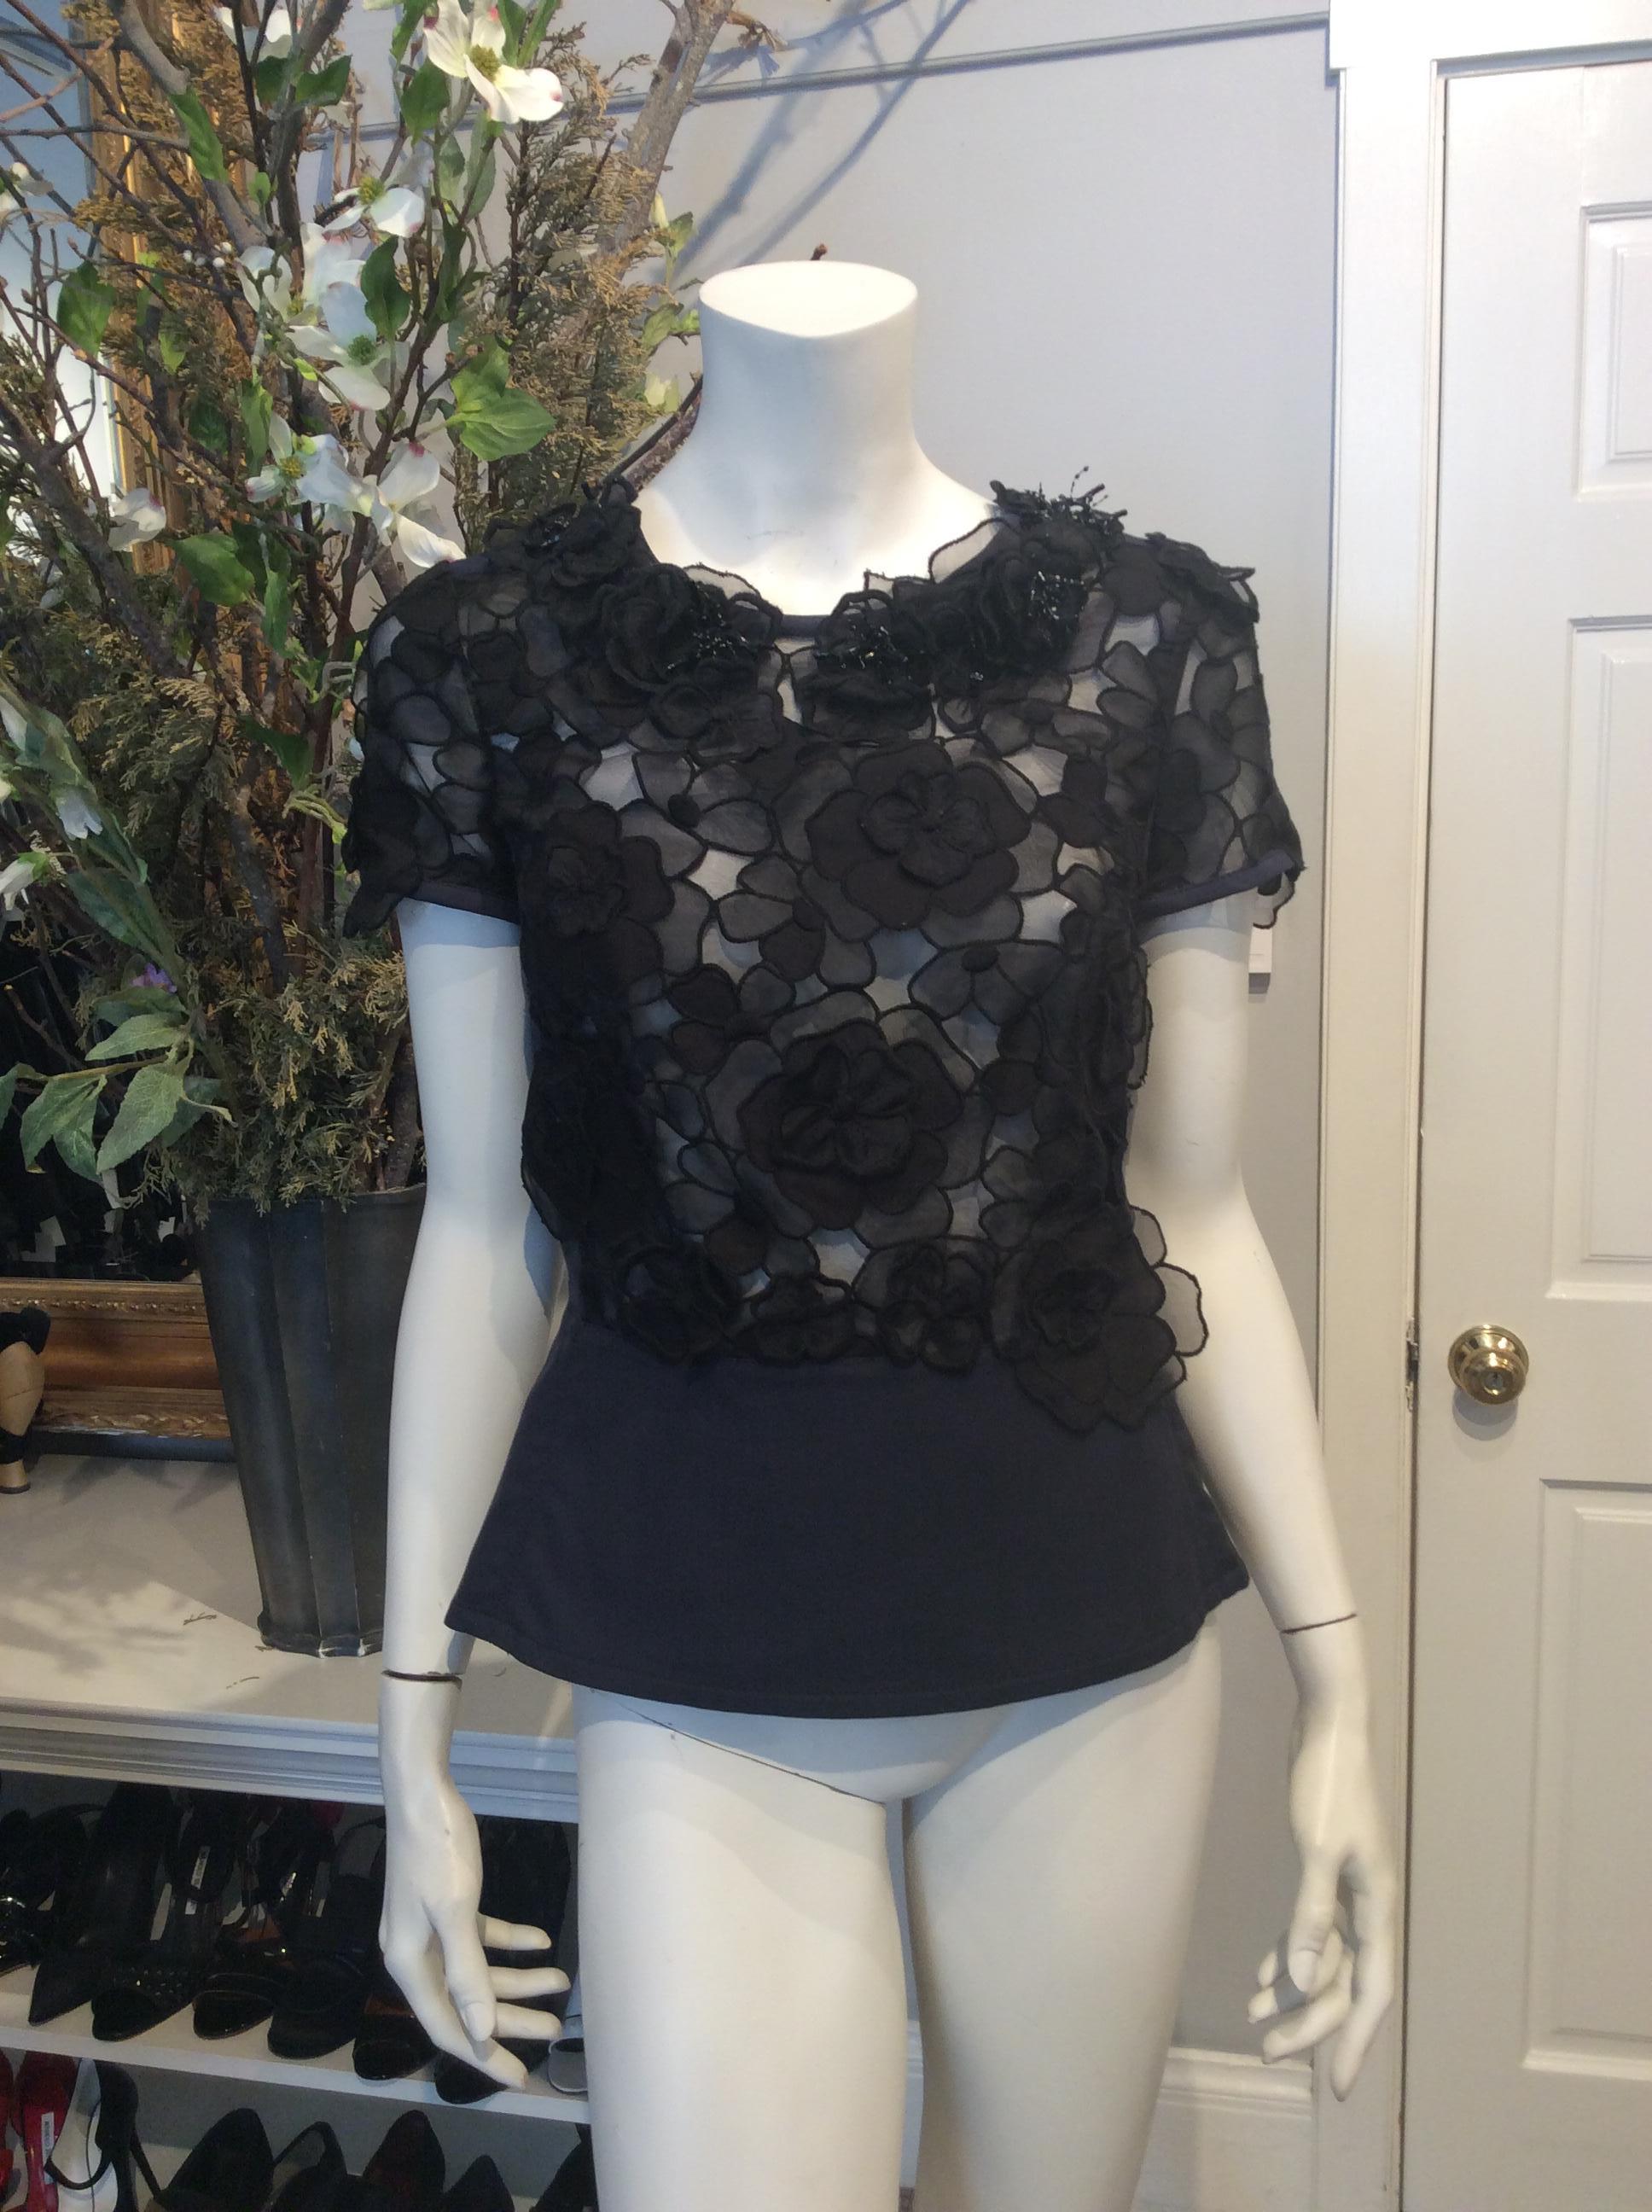 Black and navy Louis Vuitton fitted peplum top. Sheer black front with flowers throughout cap sleeves. Black coral shaped beading at neck. Navy peplum. Zippered closure along entire back of garment.

Sizing: Fr38, Us6

Fabric content: Cotton,